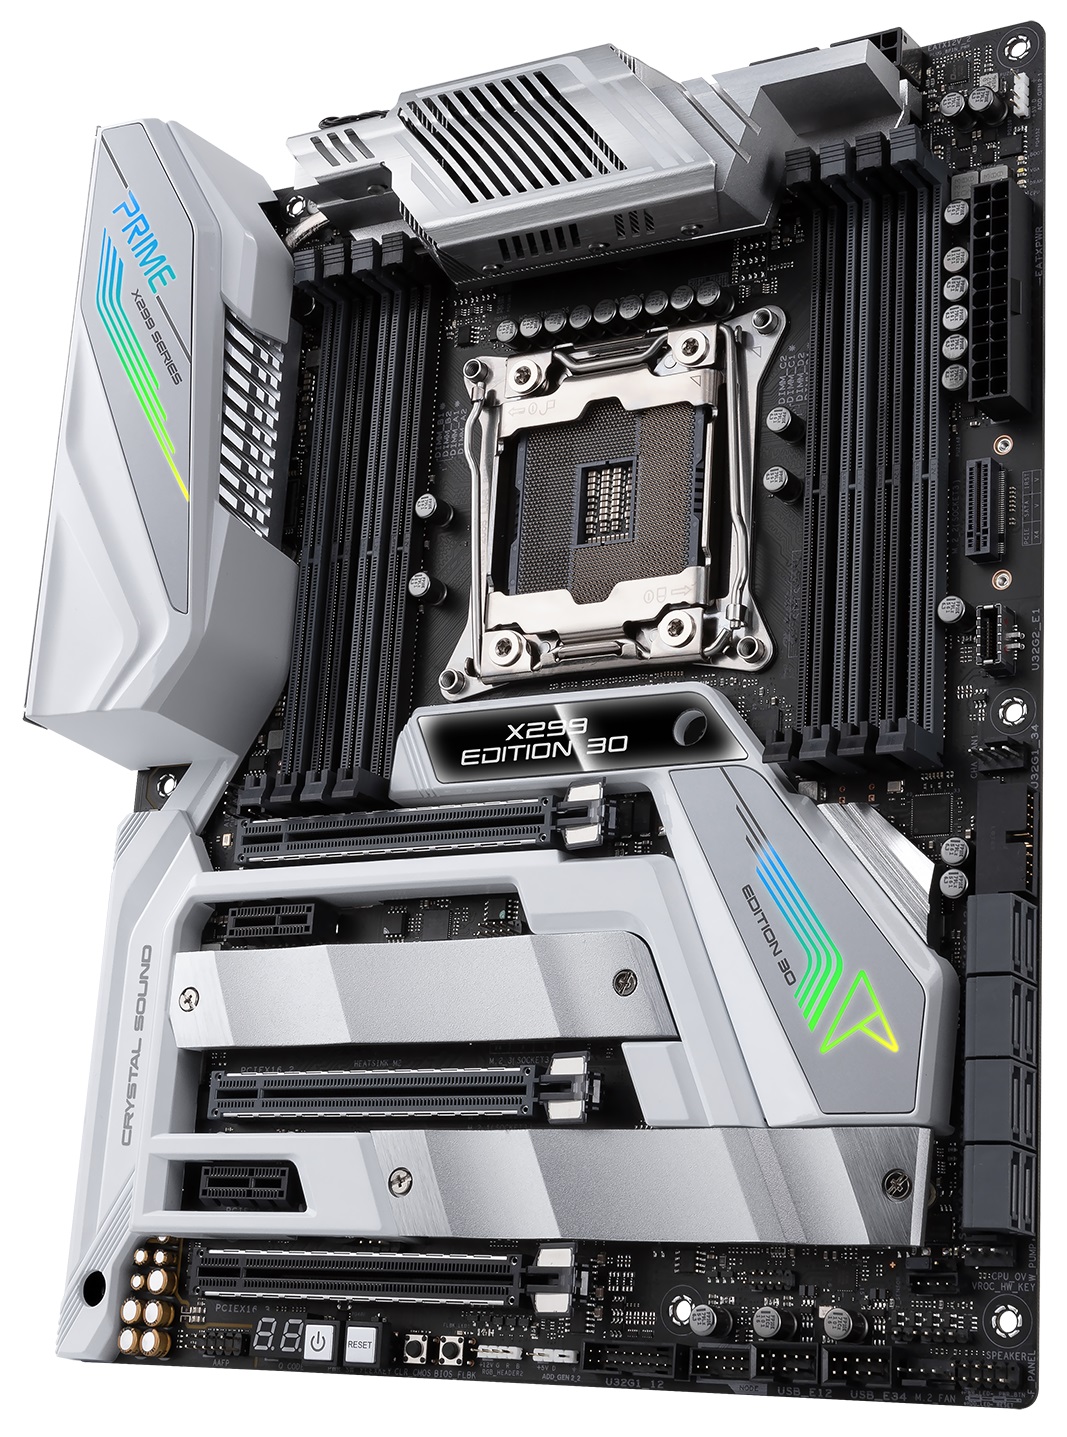 The ASUS Prime X299 Edition 30 Motherboard: 30 Years of ASUS, now